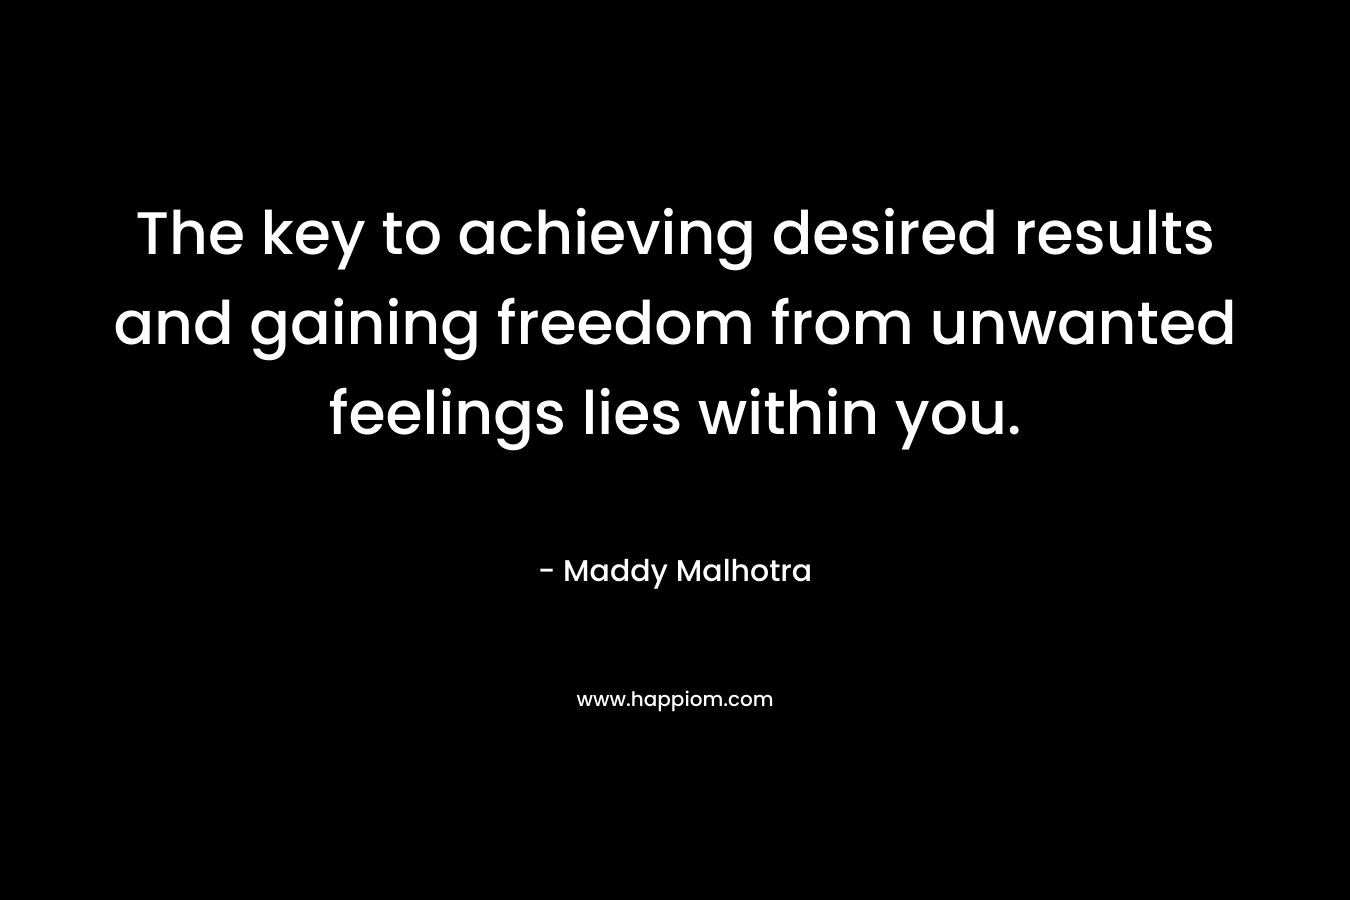 The key to achieving desired results and gaining freedom from unwanted feelings lies within you. – Maddy Malhotra